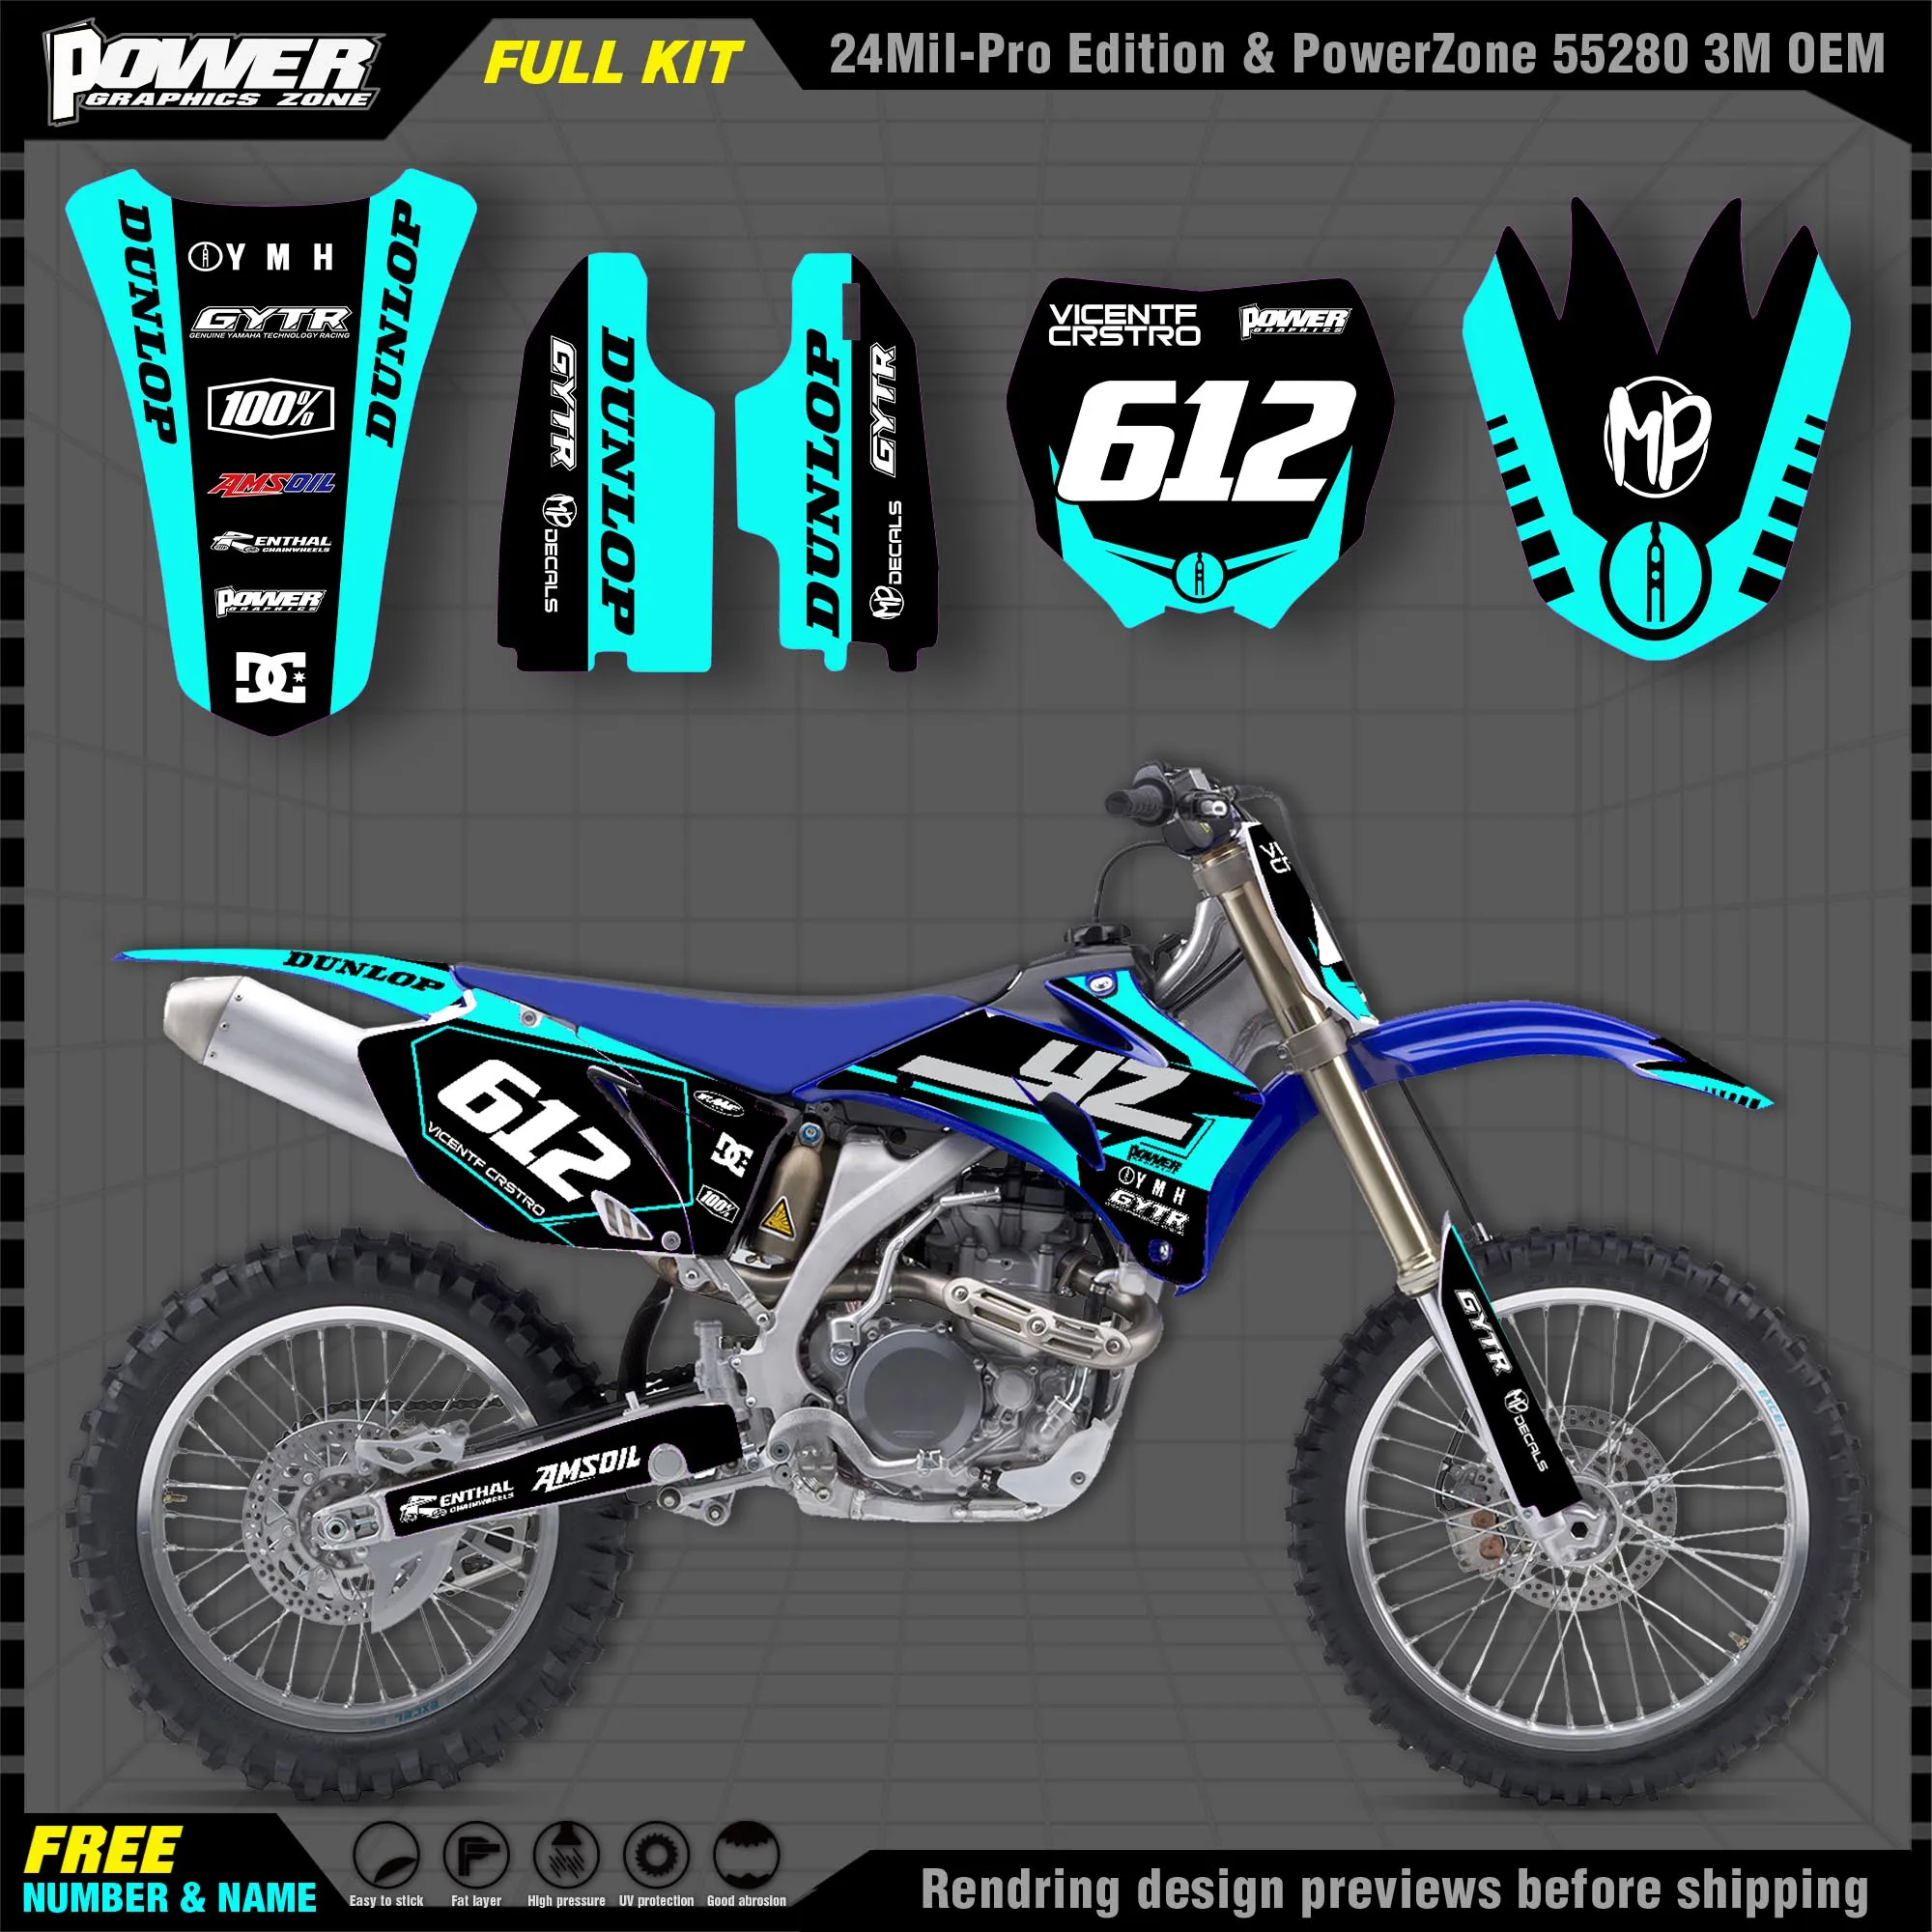 

PowerZone Custom Team Graphics Backgrounds Decals 3M Stickers Kit For YAMAHA 2006-09 YZF250 450 004